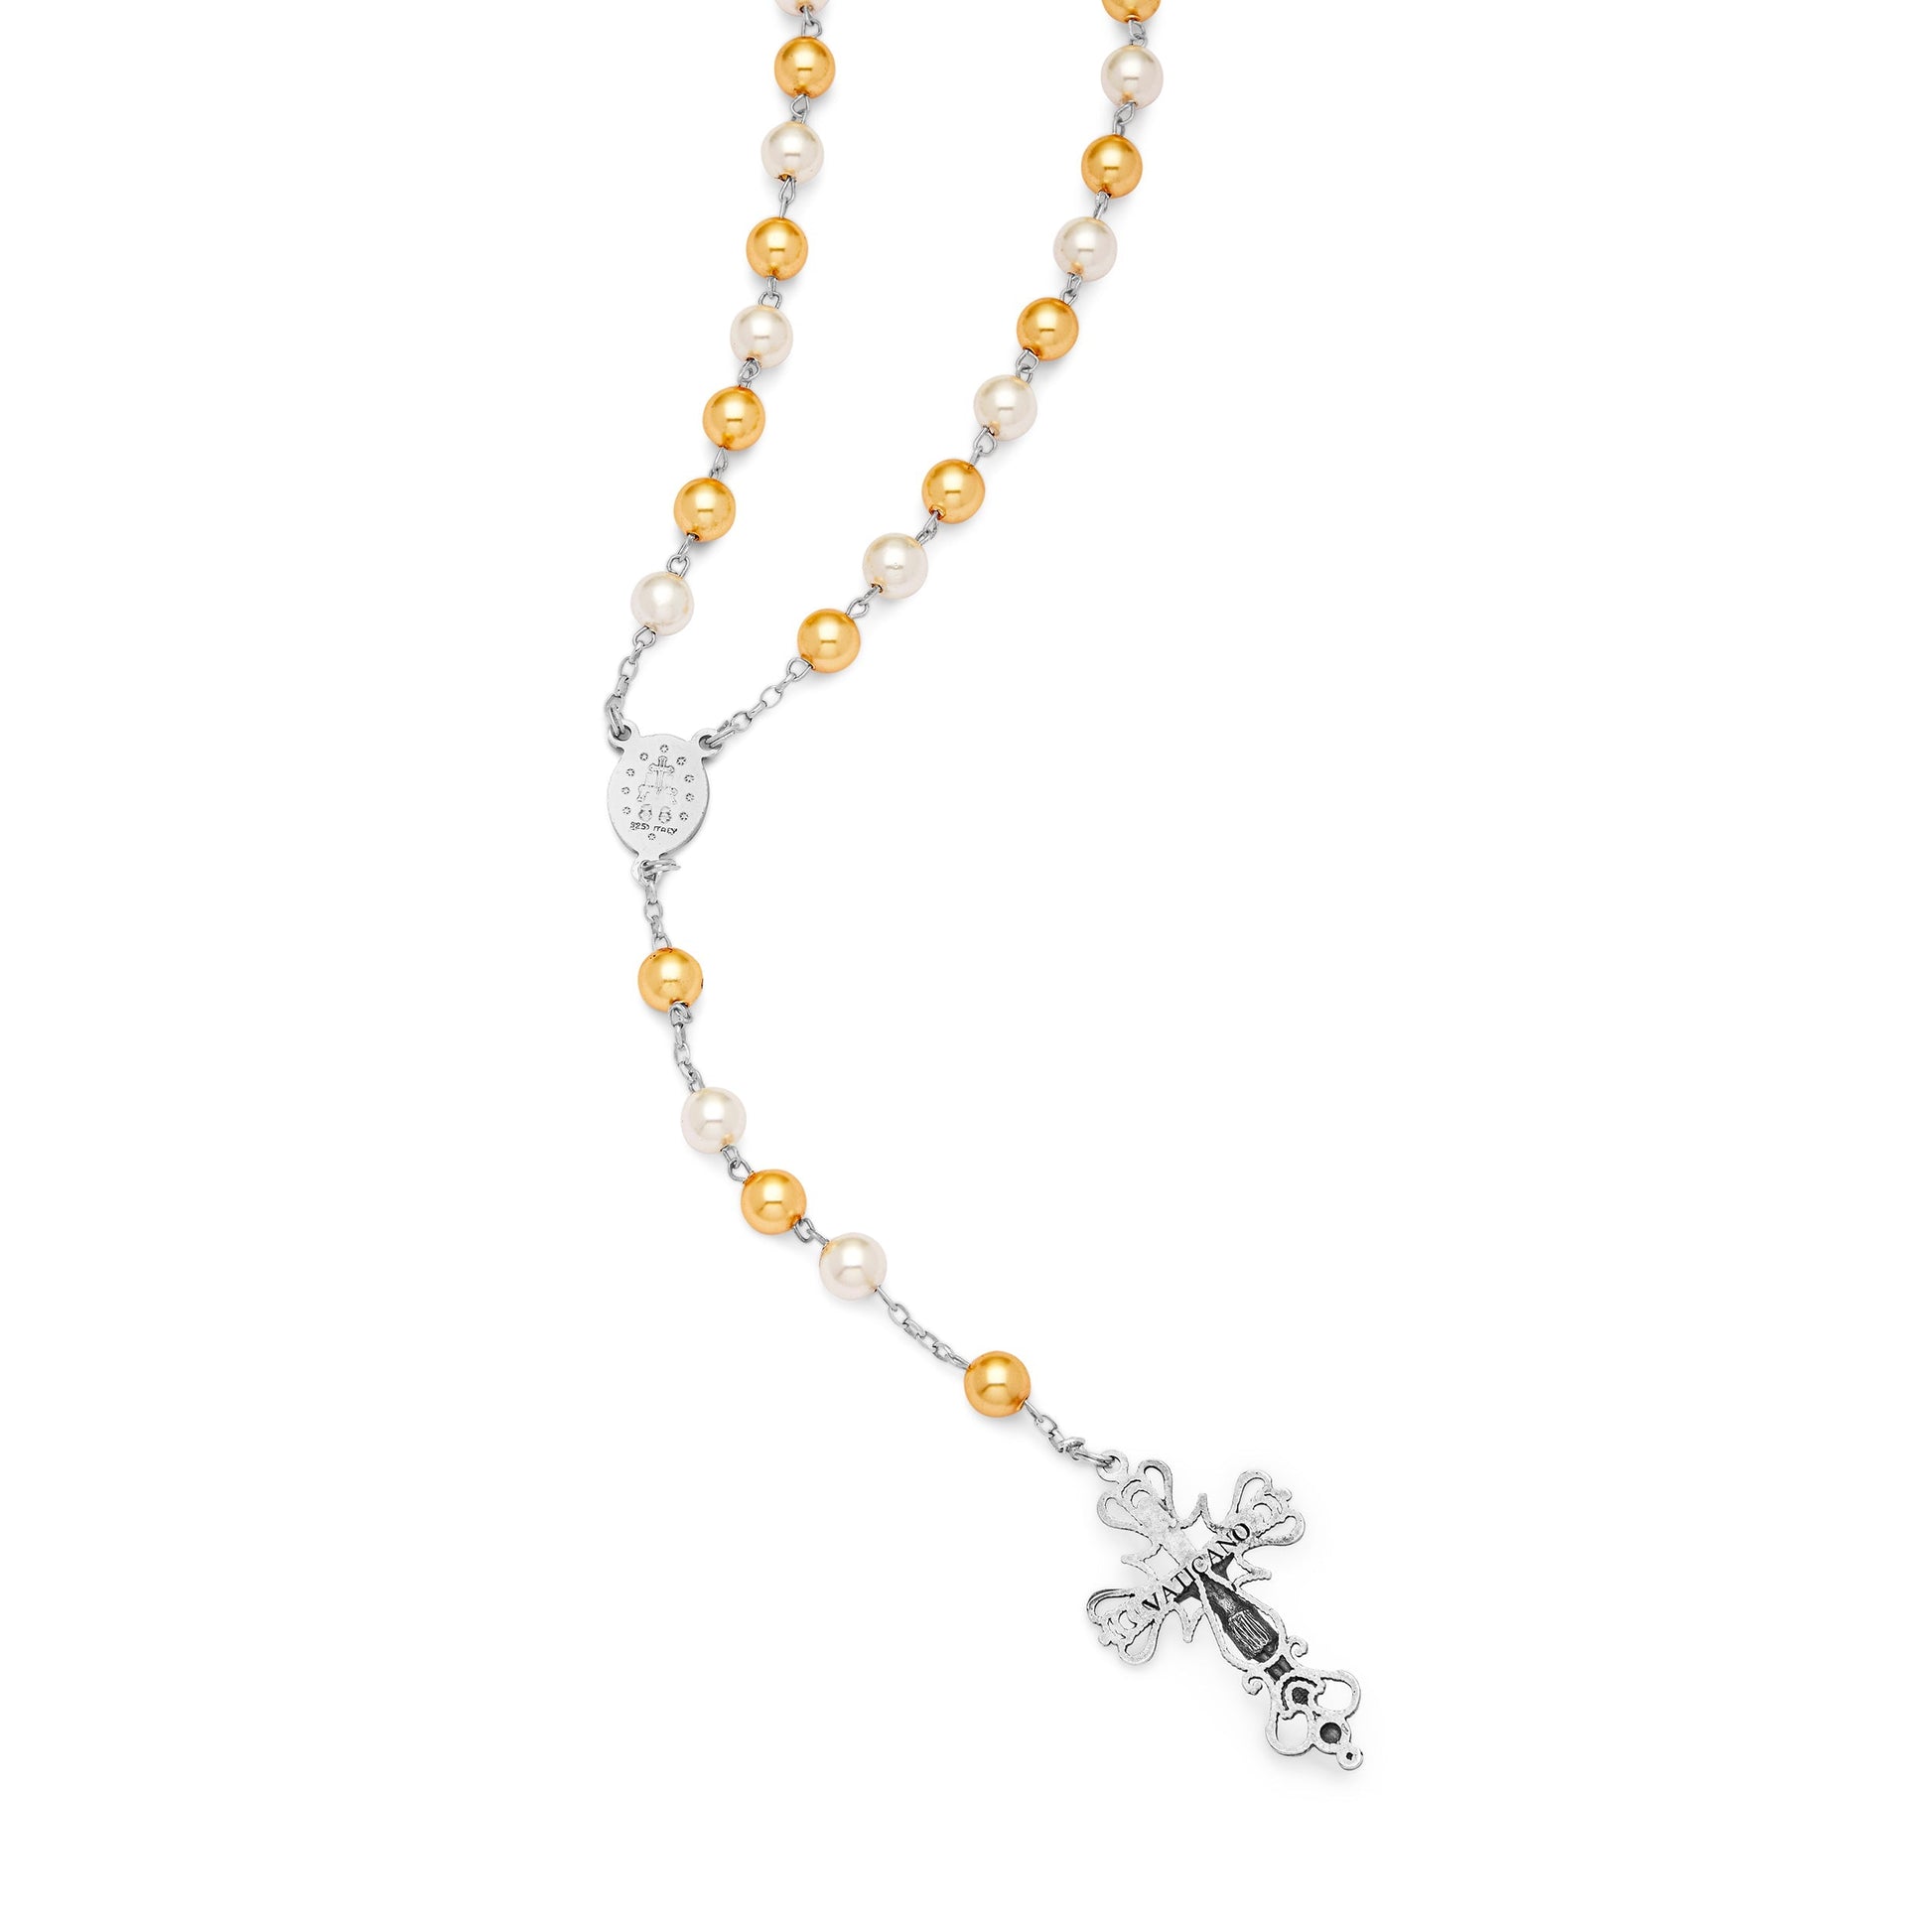 MONDO CATTOLICO Prayer Beads Sterling Silver Rosary Swarovski Crystal Pearls White and Gold Beads